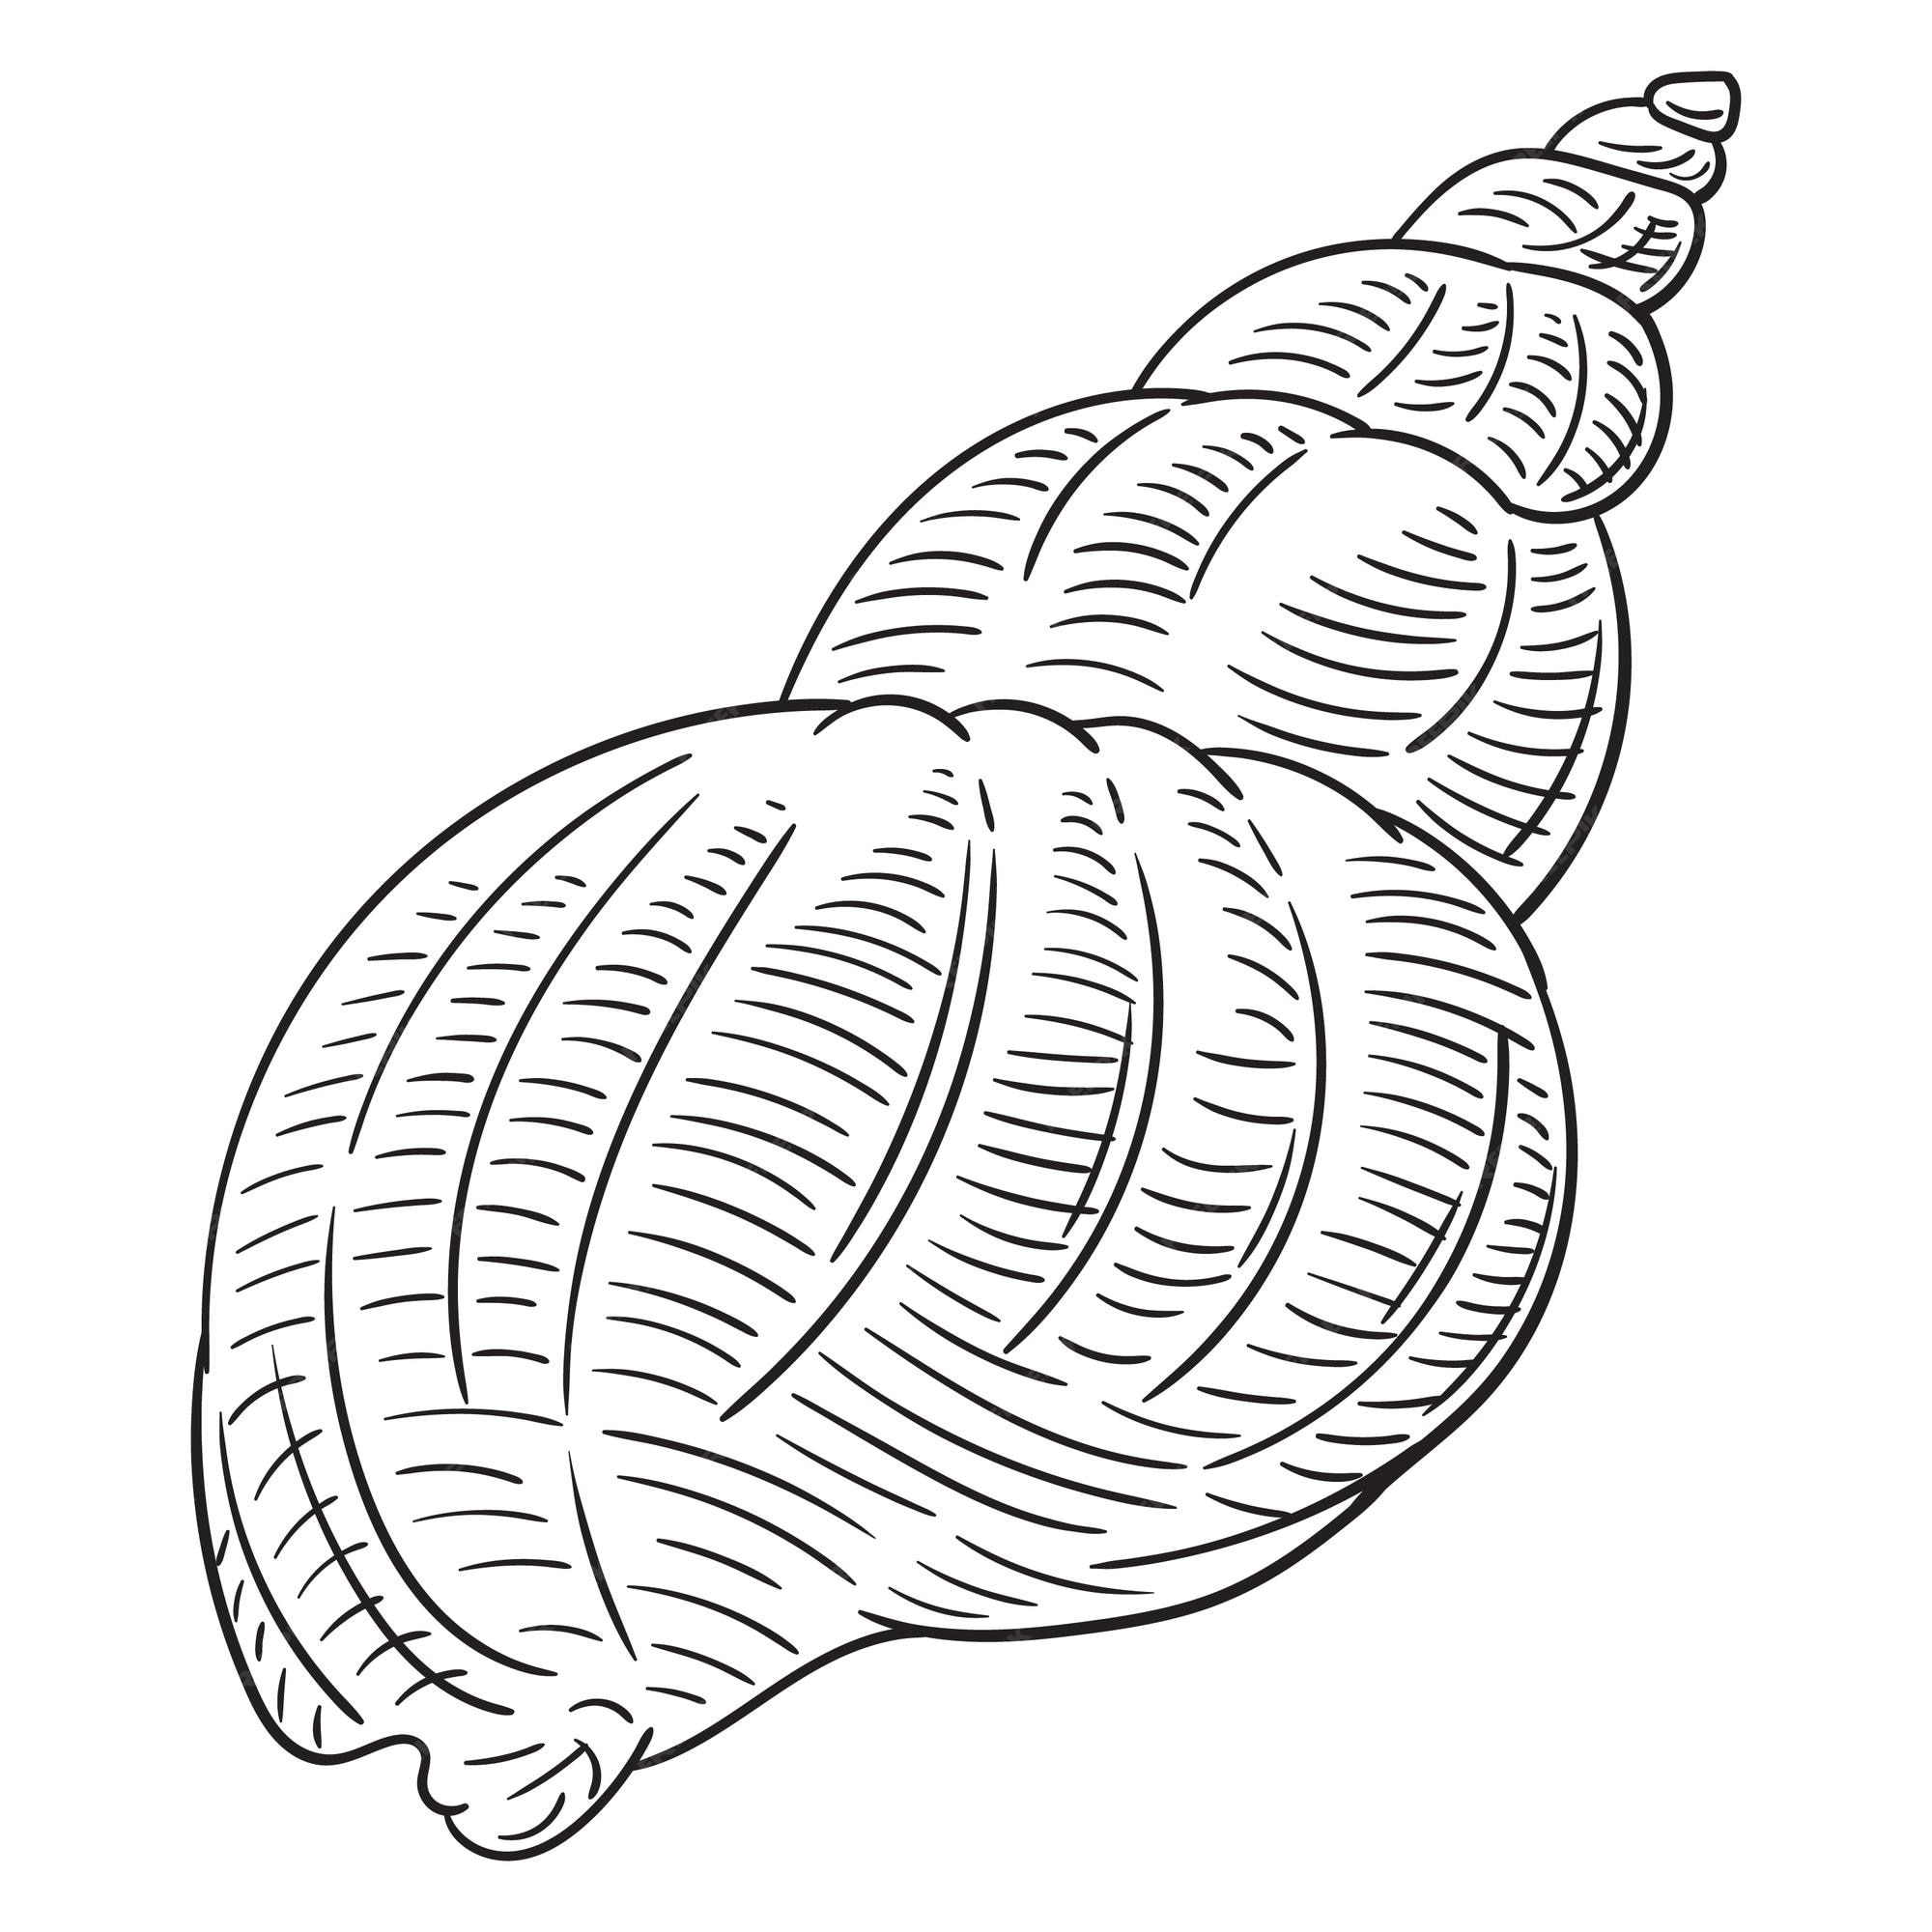 Premium vector black and white contour vector illustration of shell isolated on white background for coloring page